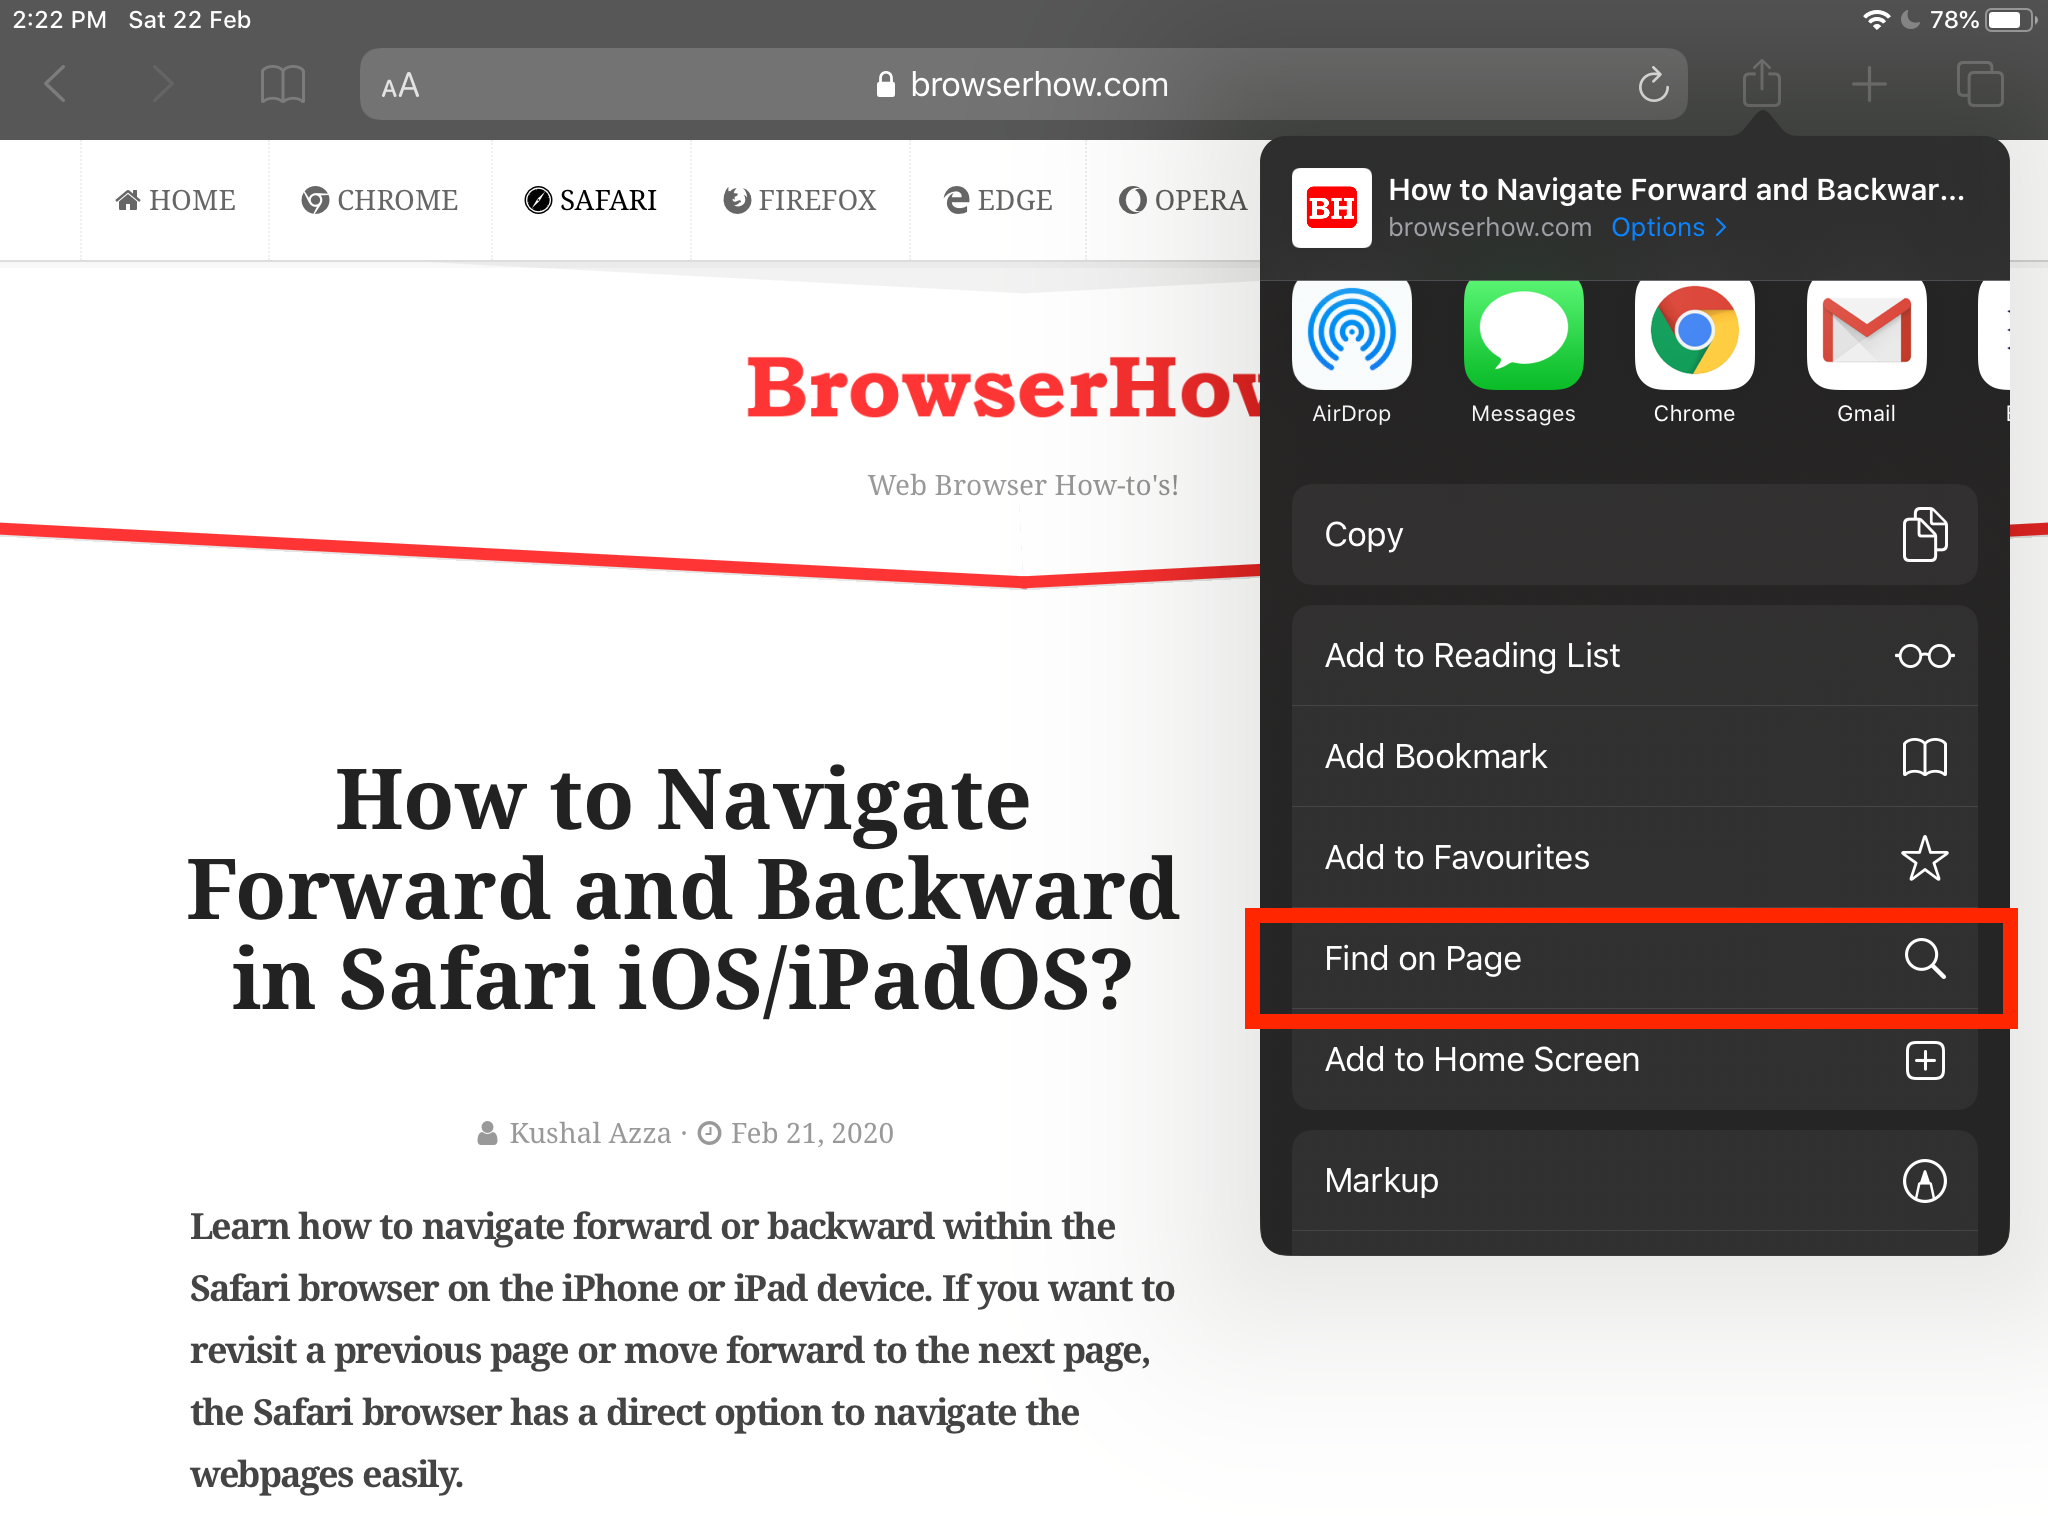 Find on Page in Safari for iPhone and iPad